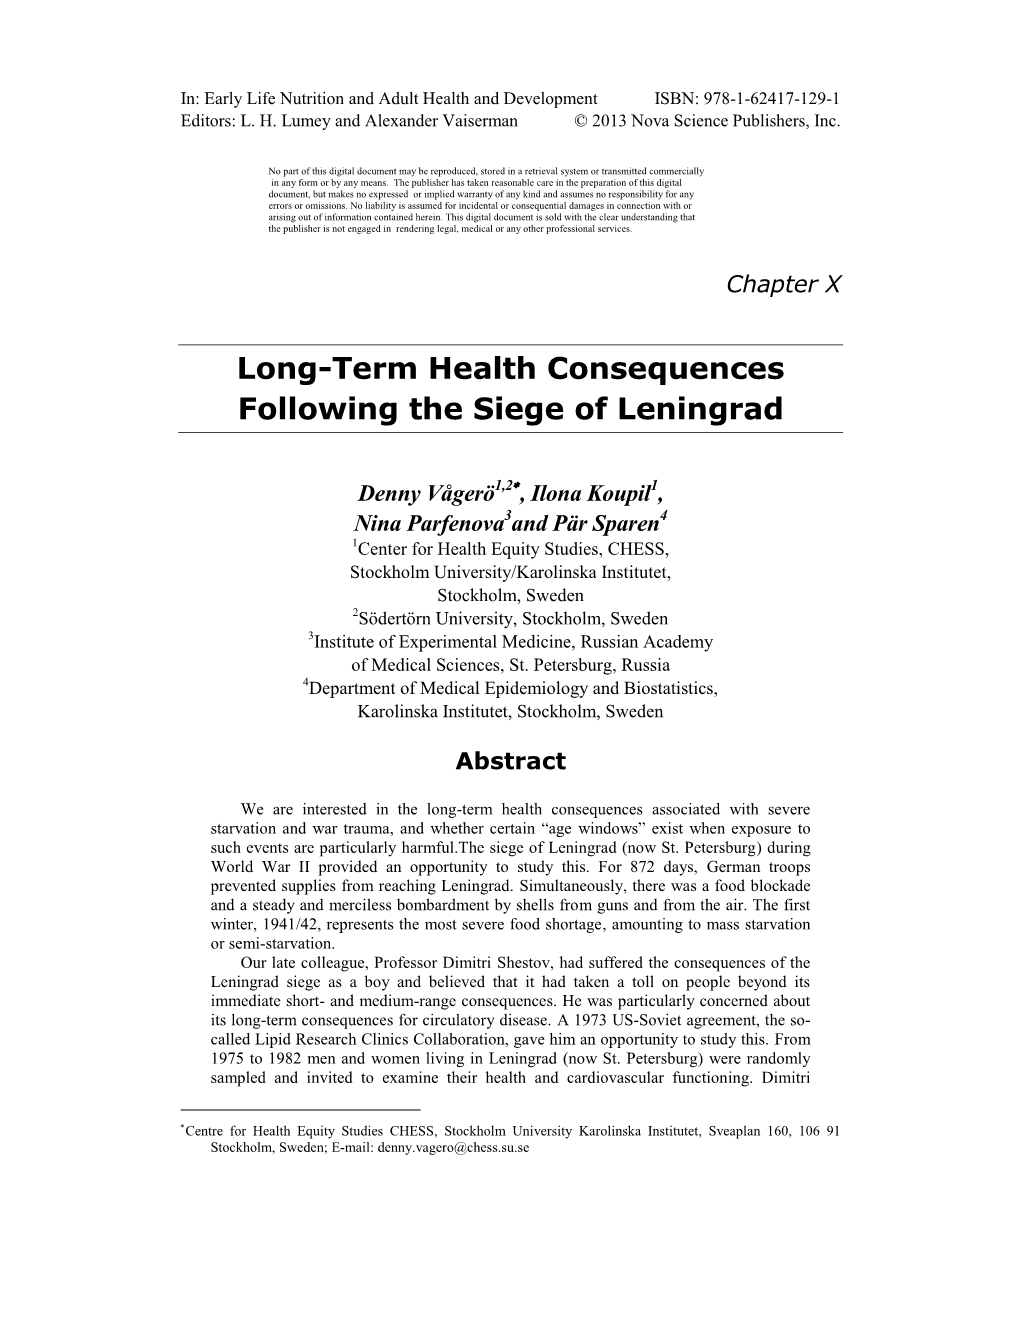 Long-Term Health Consequences Following the Siege of Leningrad